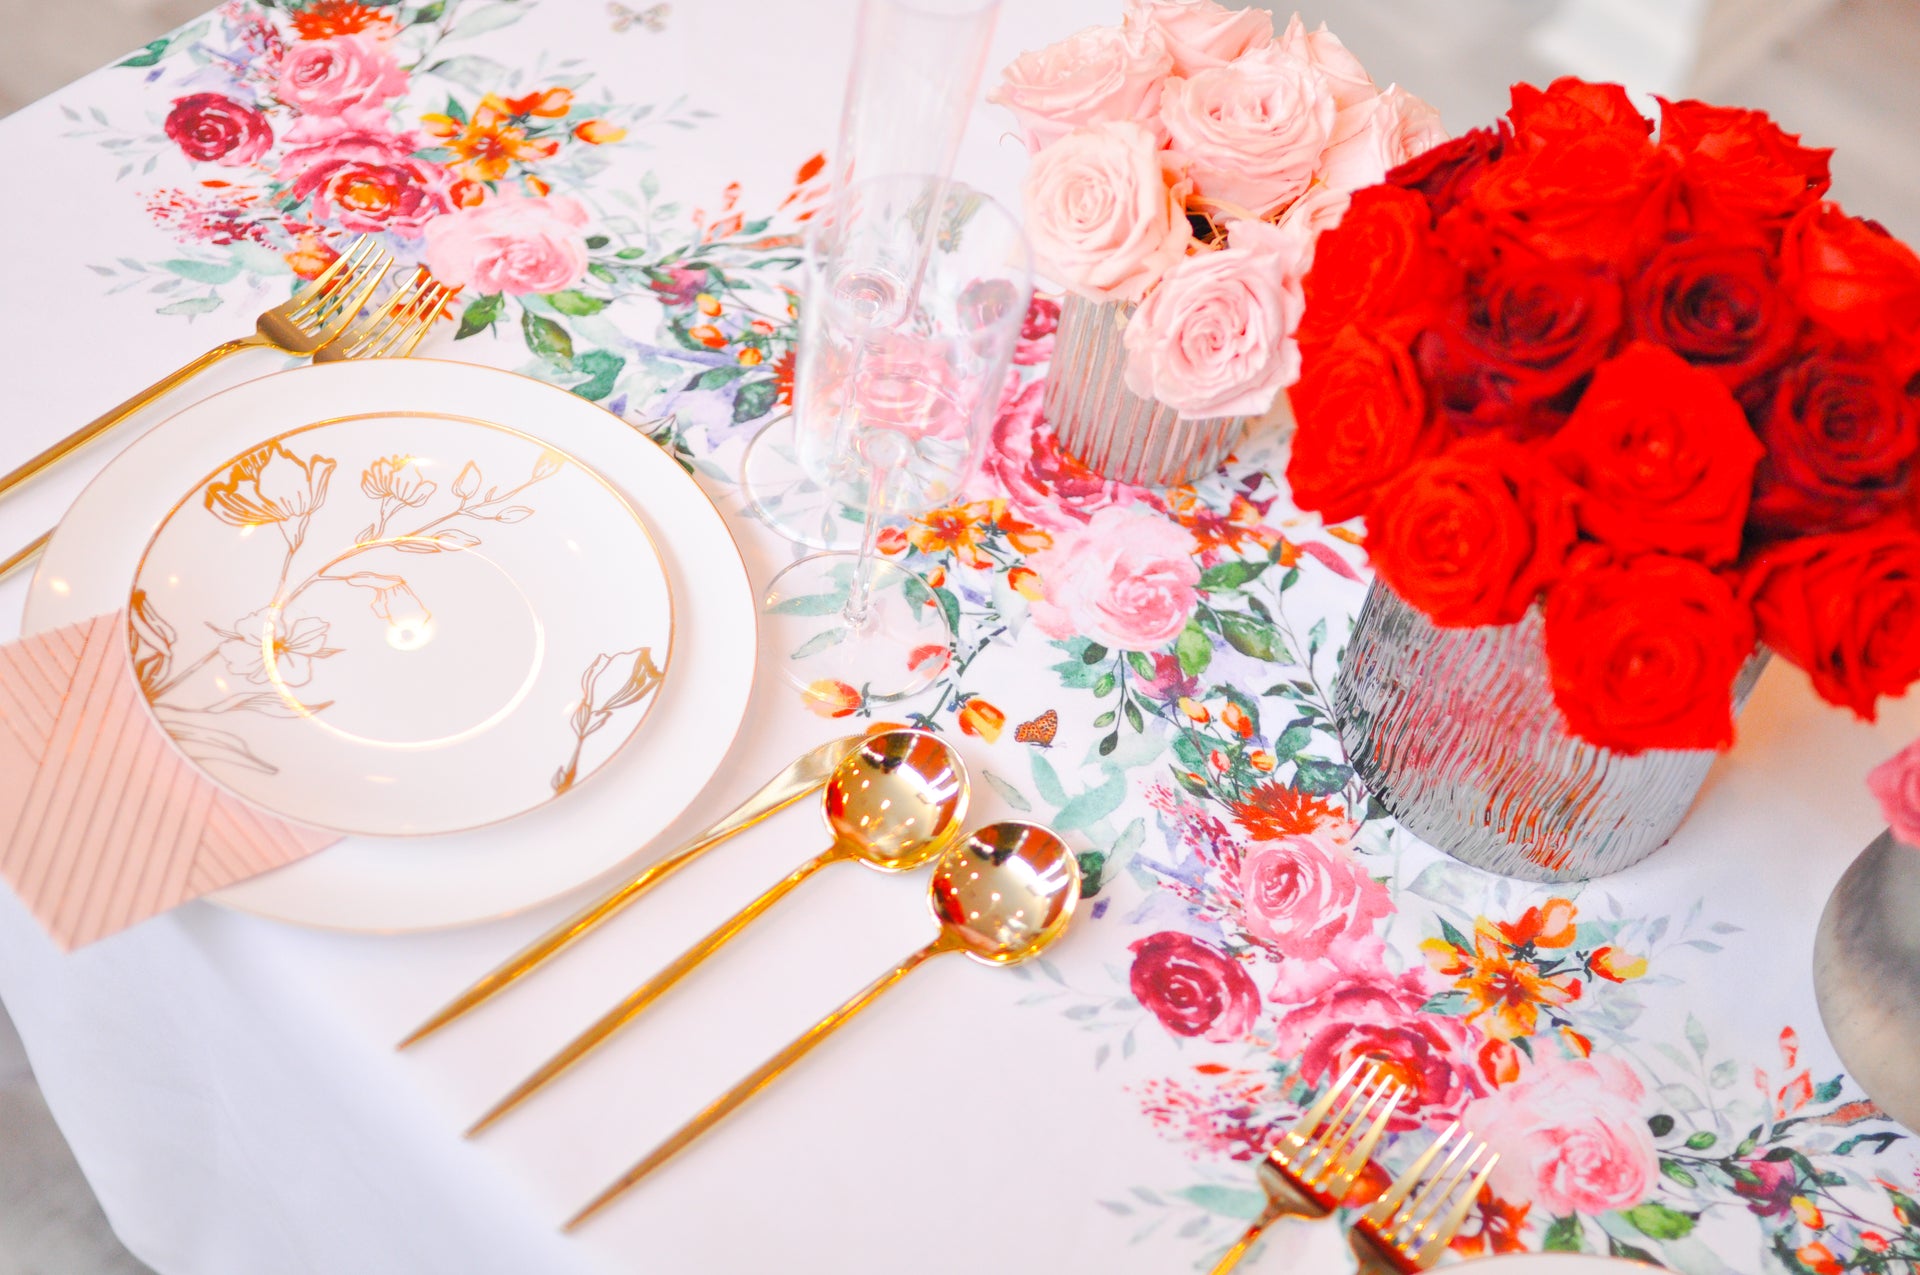 Hop into Spring with This Stylish and Creative Party Tablescape